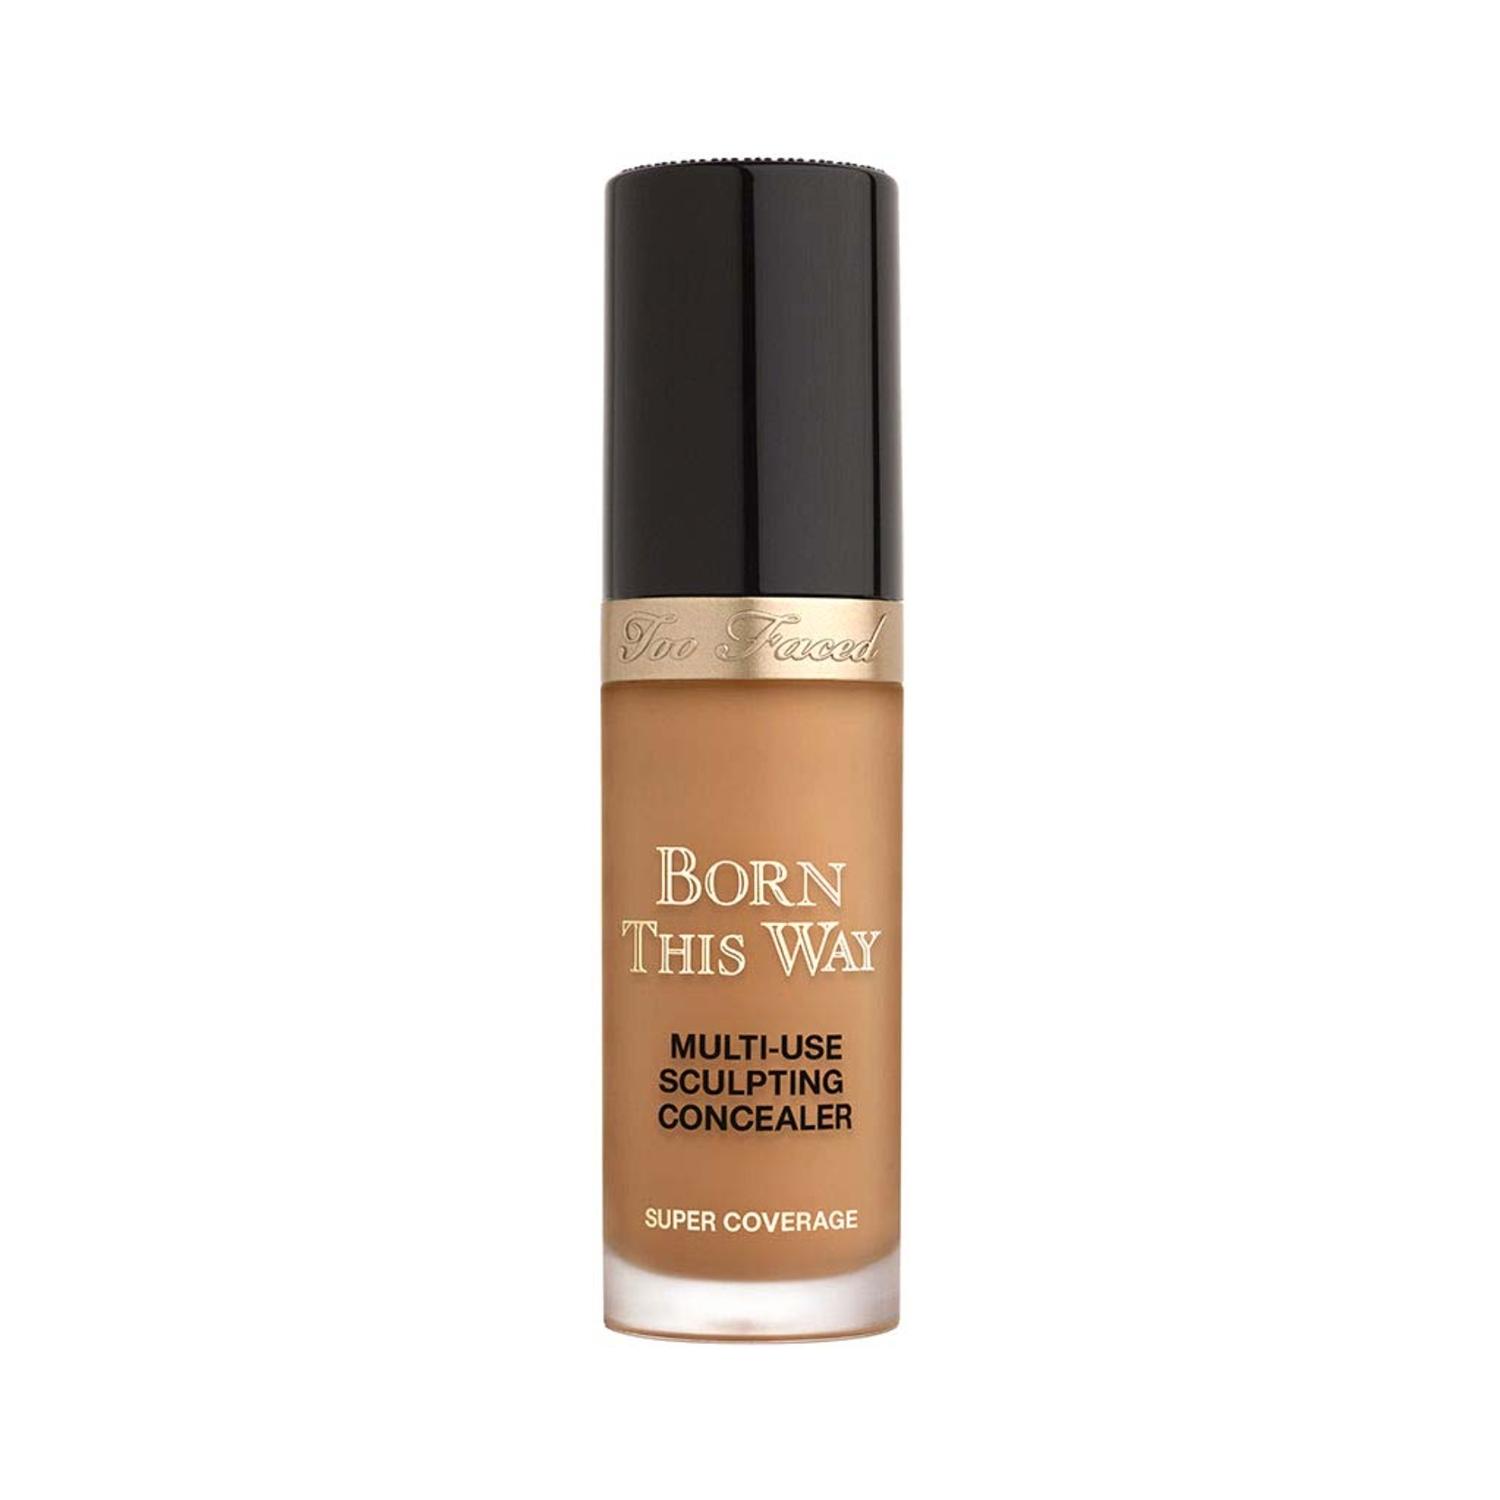 too-faced-born-this-way-super-coverage-multi-use-sculpting-concealer--cloud-(13.5ml)